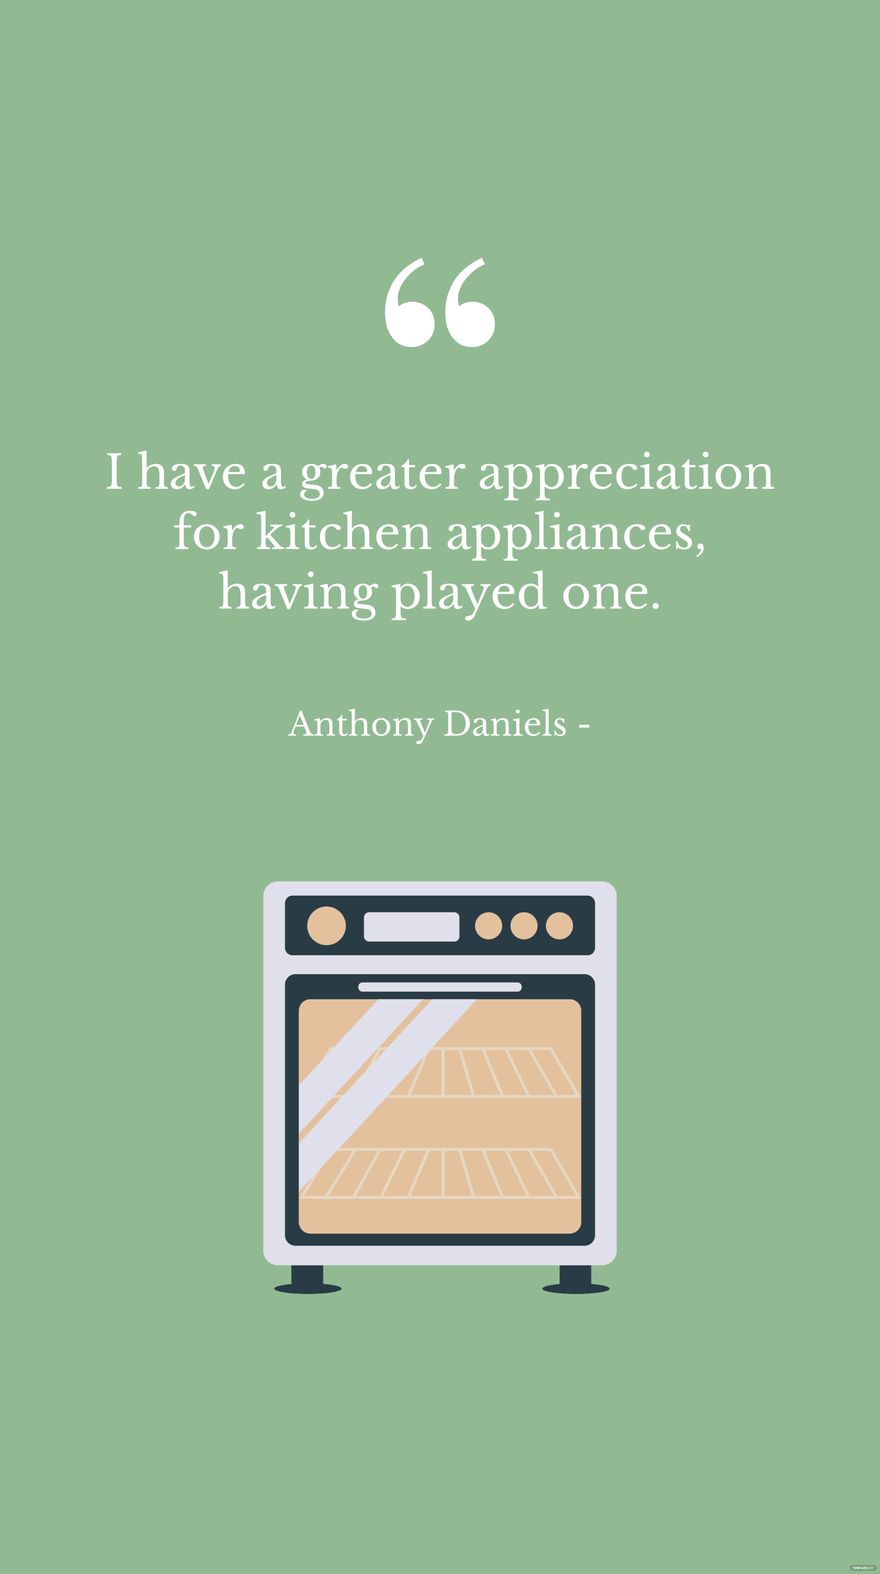 Anthony Daniels - I have a greater appreciation for kitchen appliances, having played one.